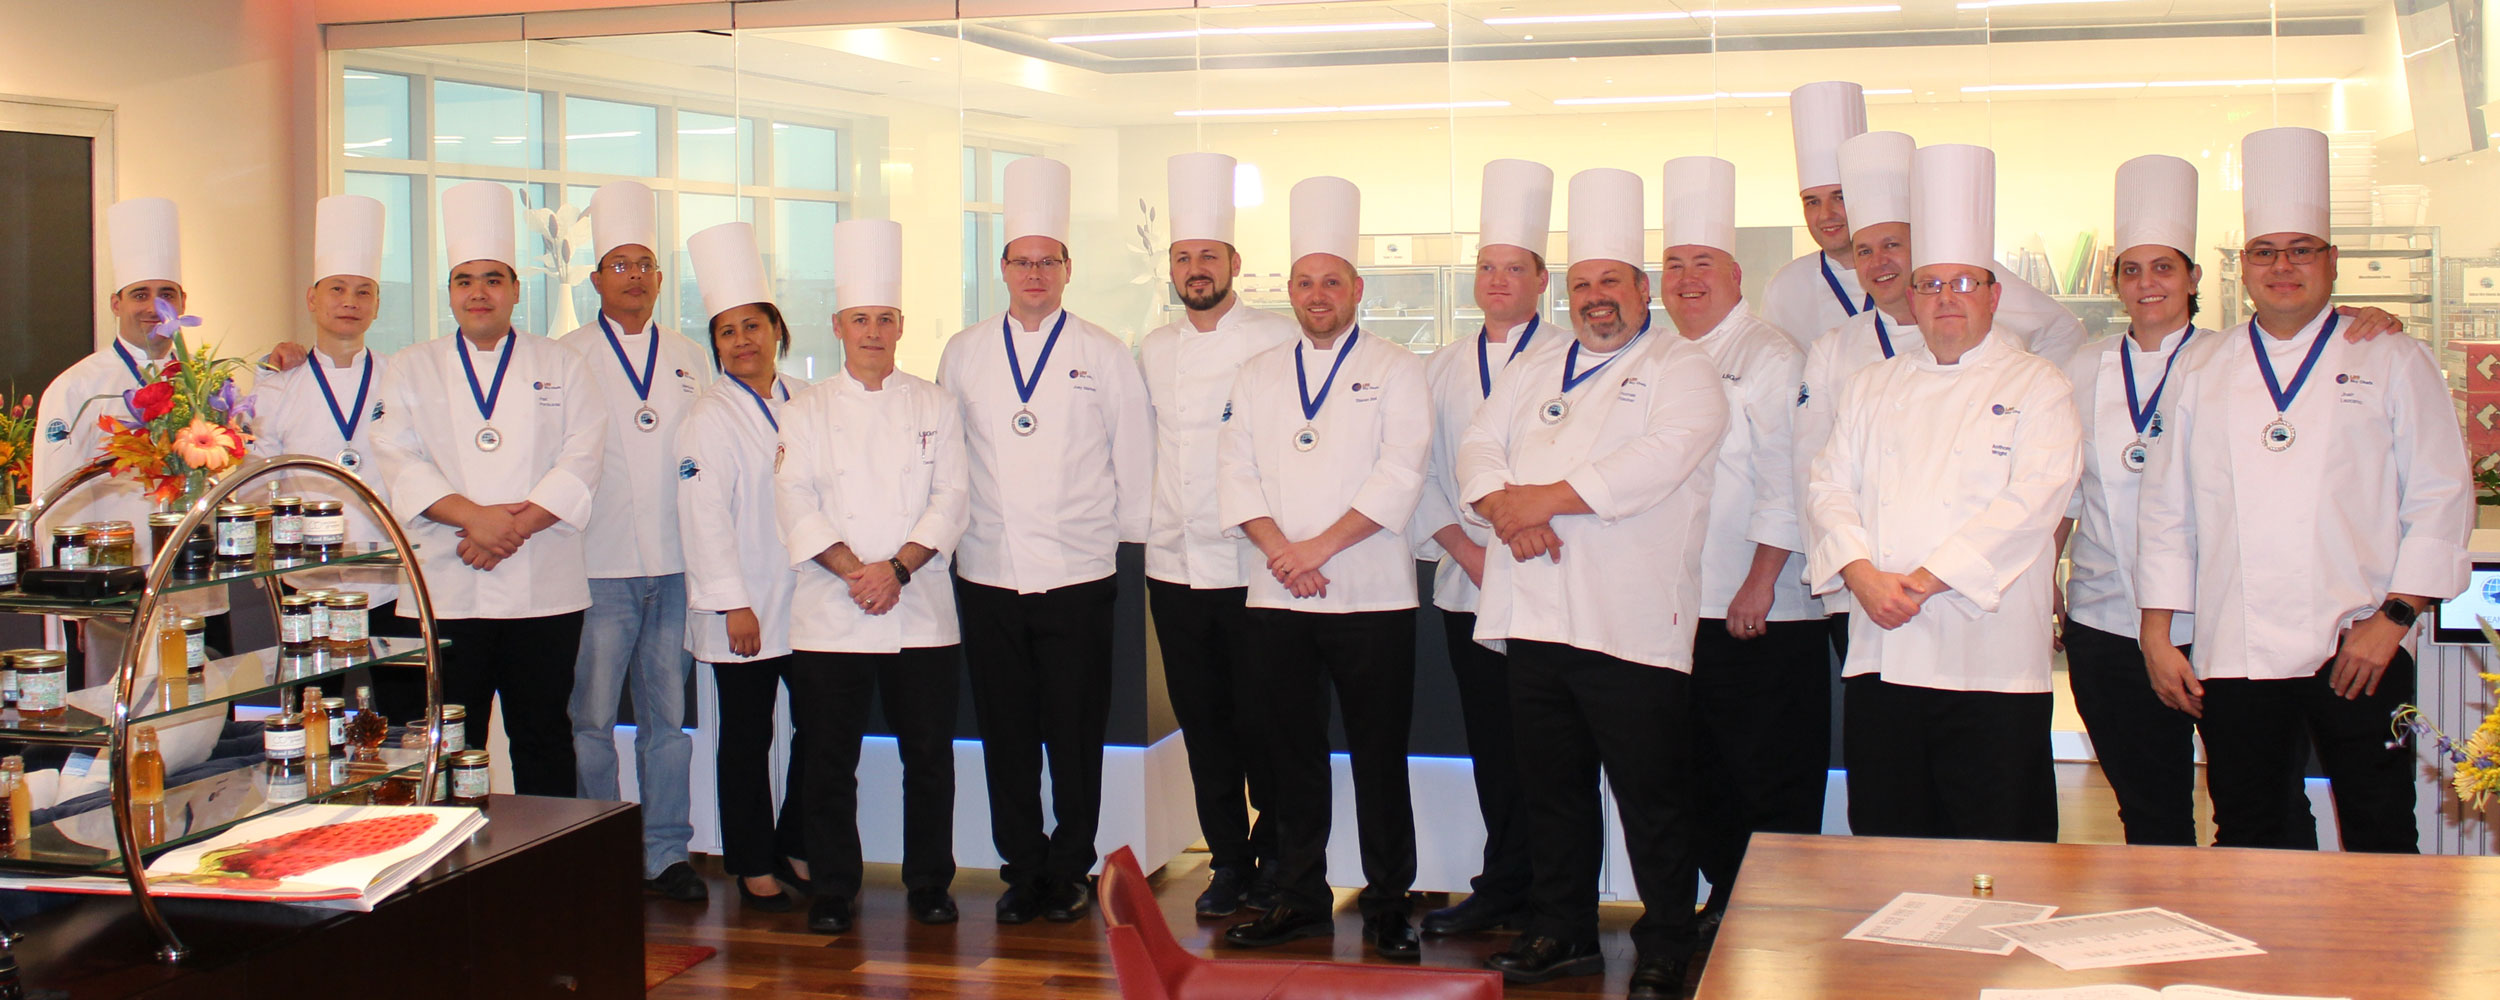 LSG Group LSG Sky Chefs Global Culinary Excellence Academy Finale Chicago